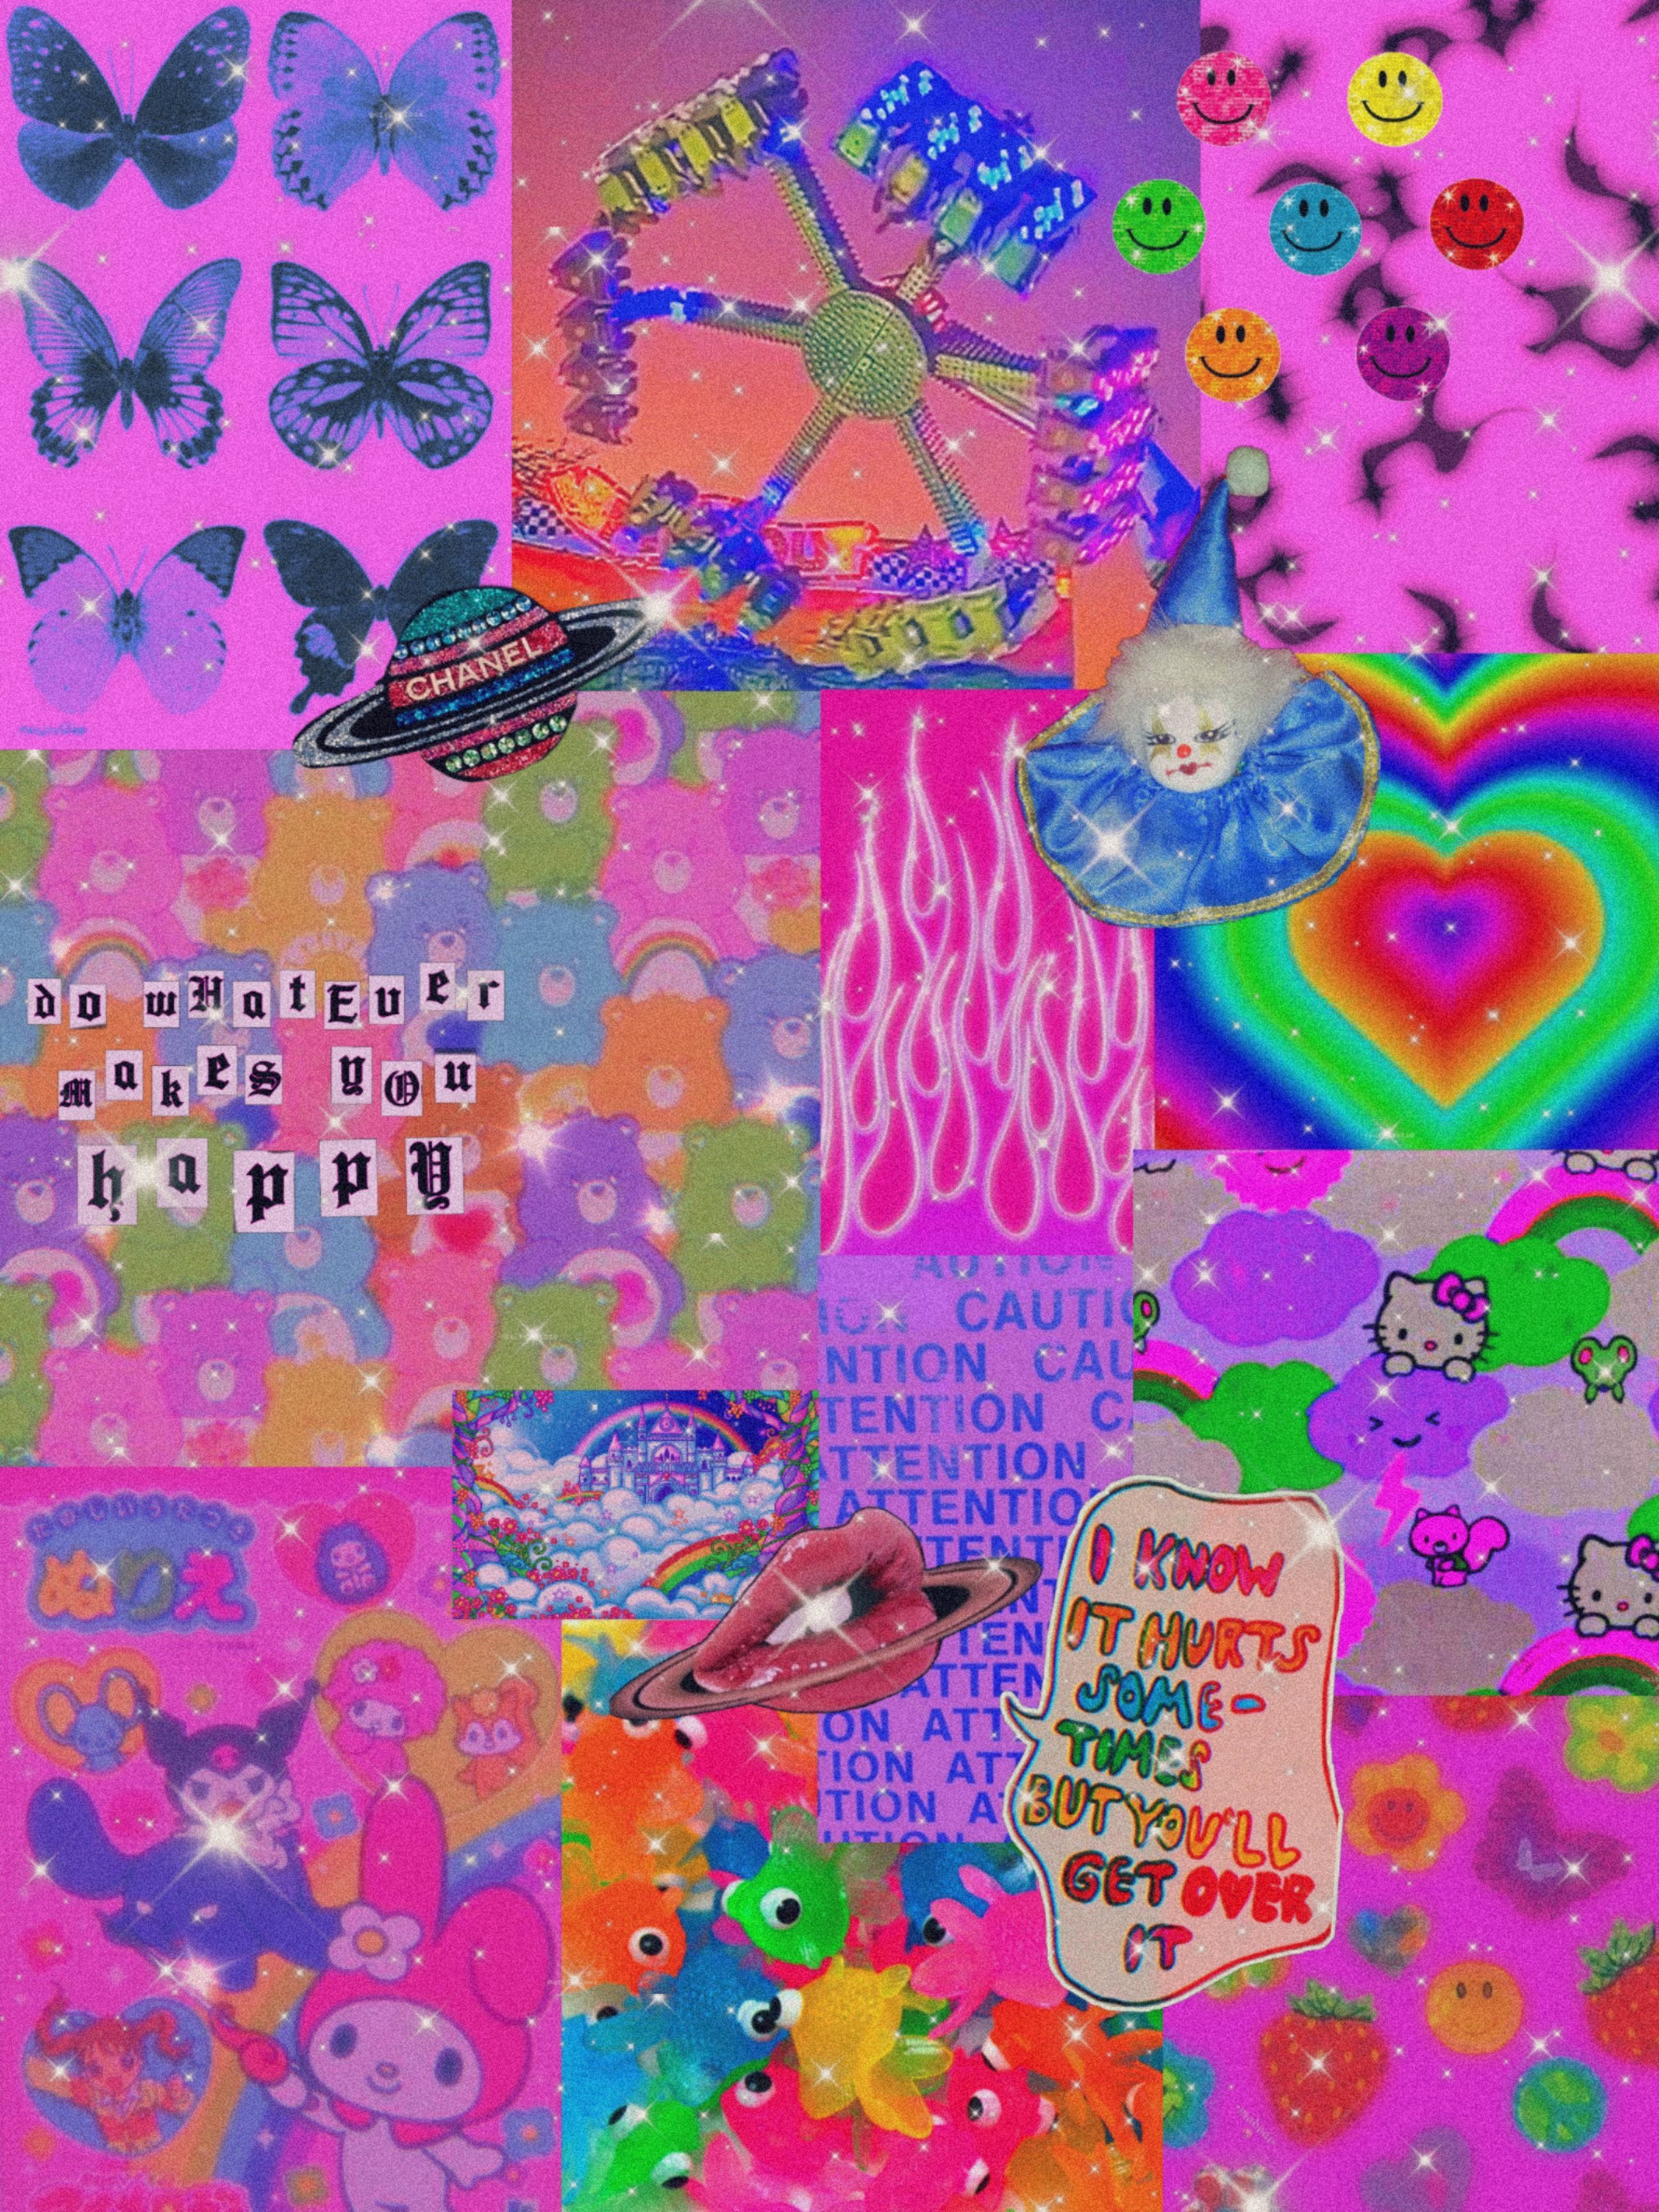 A collage of pictures that are pink and purple - Webcore, clowncore, glitchcore